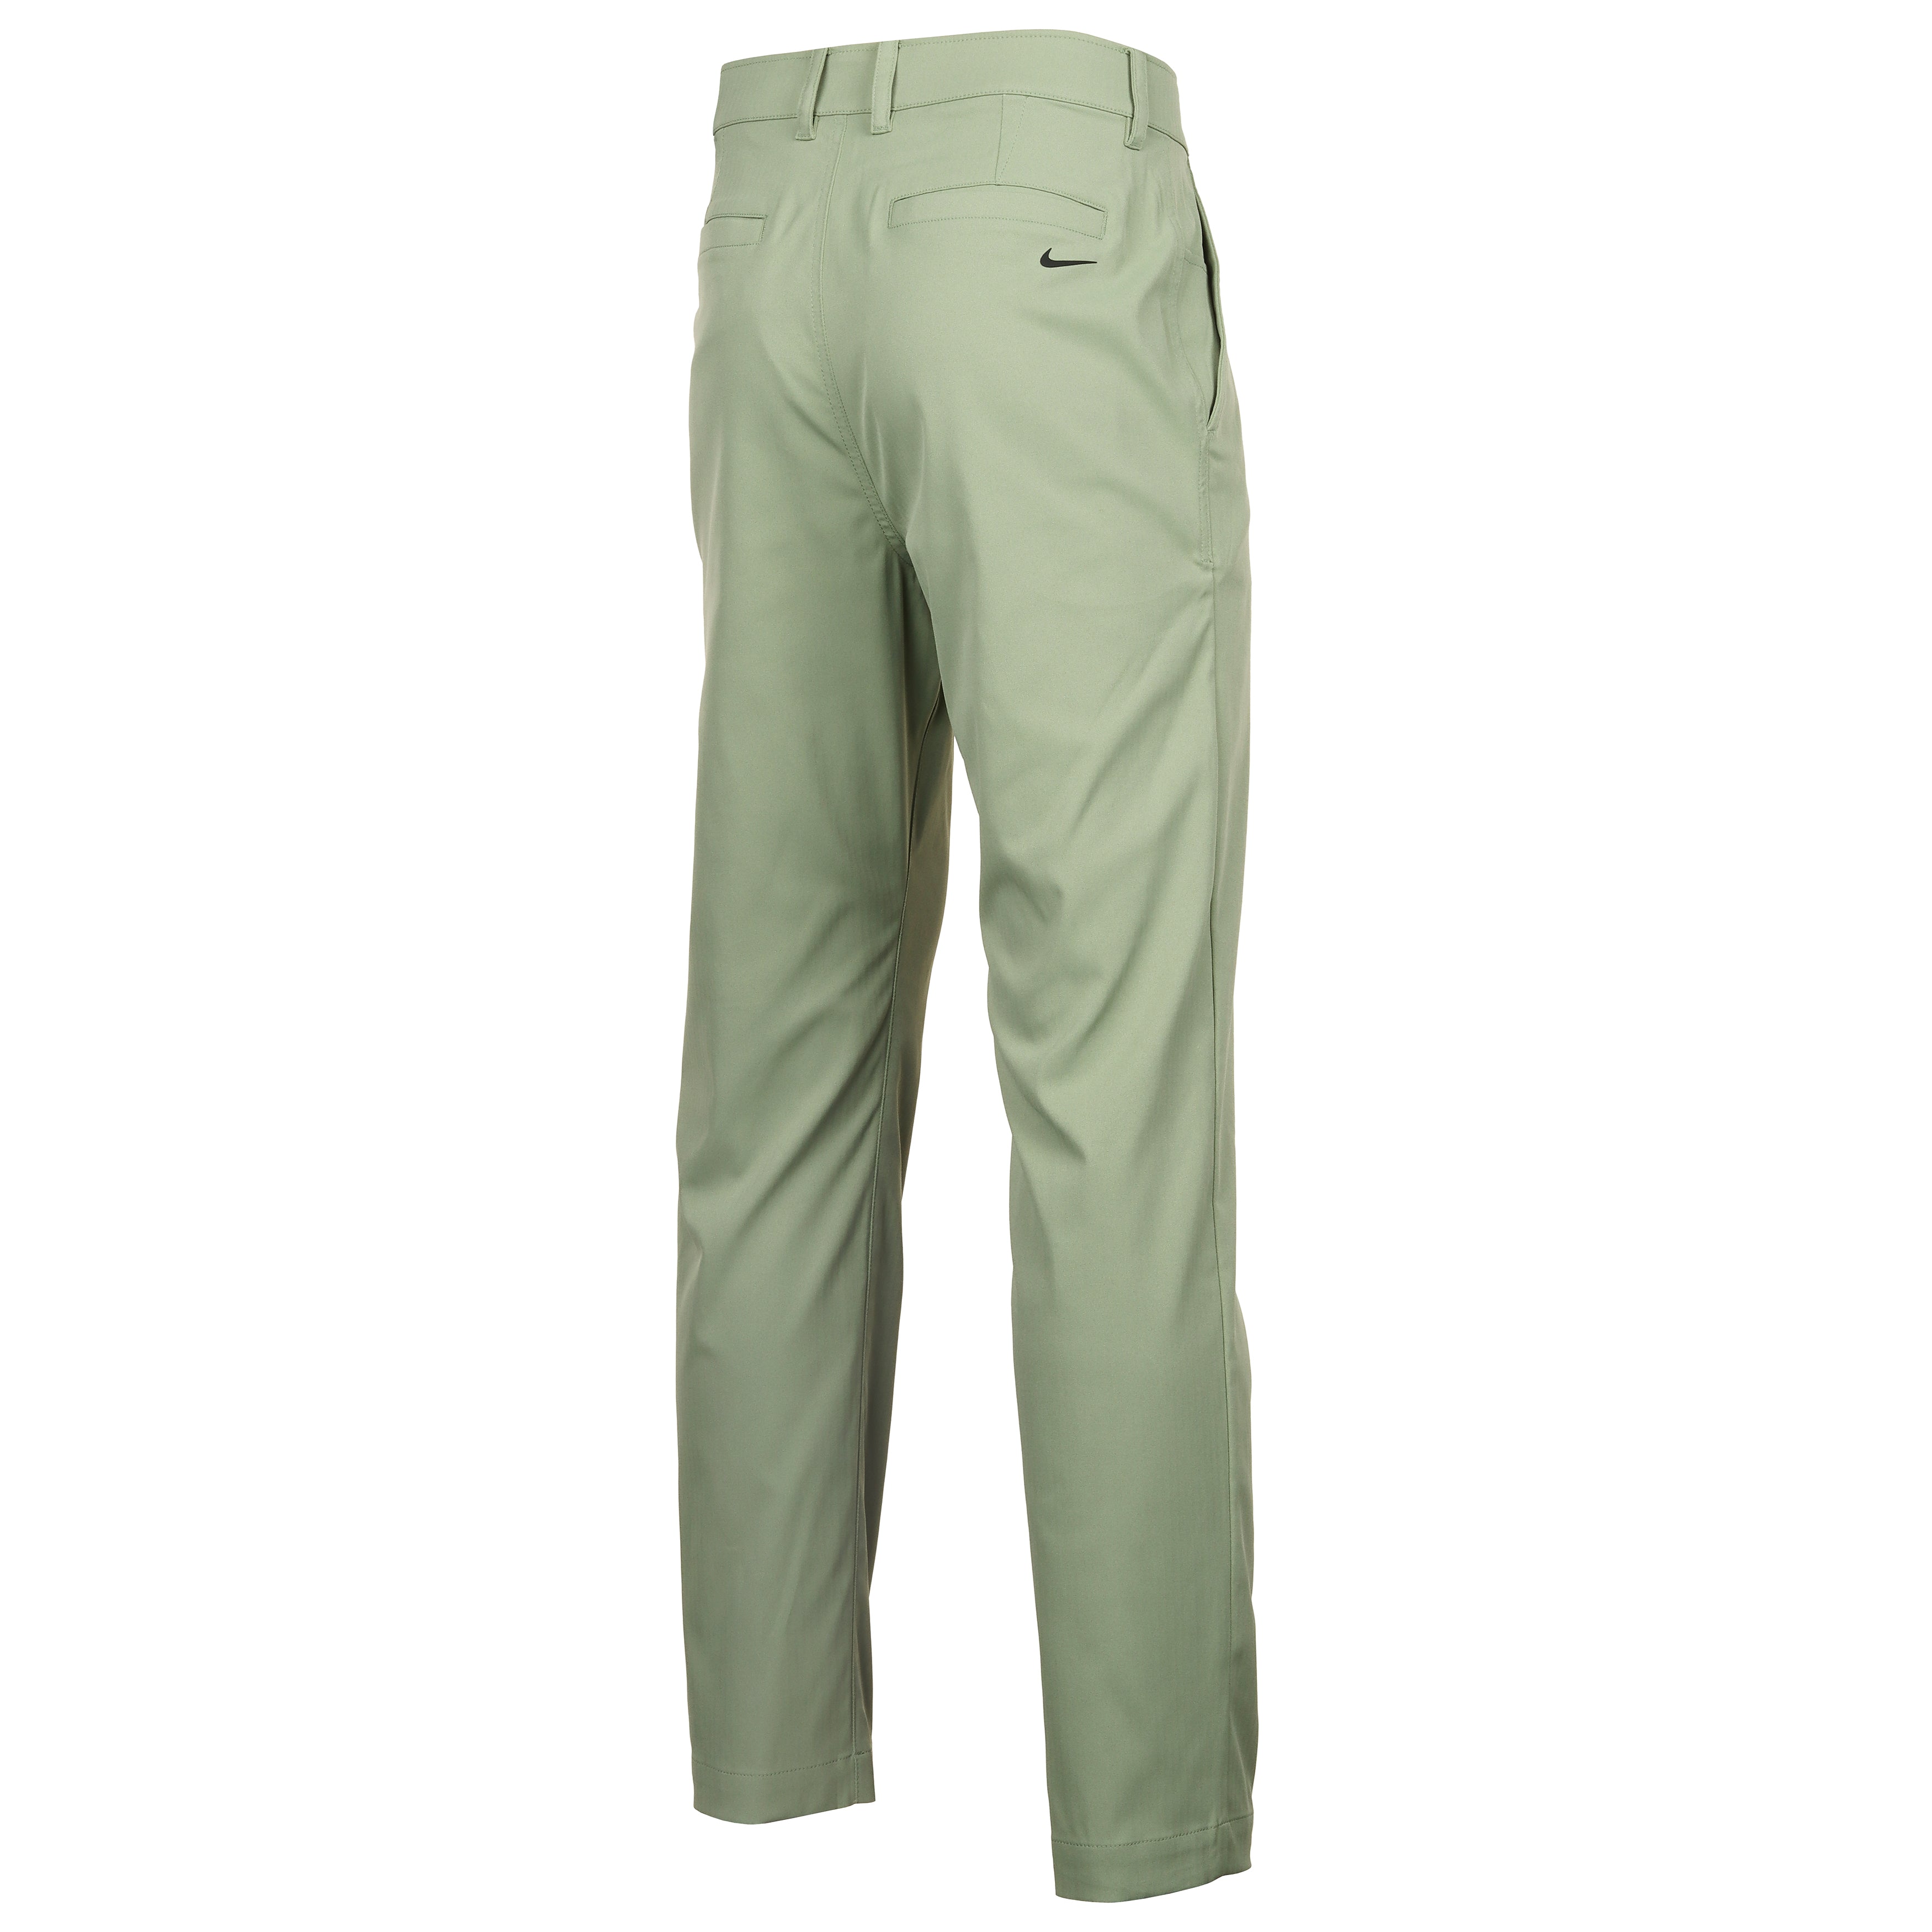 Nike Golf Tour Repel Slim Fit Chino Pants FD5622 Oil Green 386 | Function18